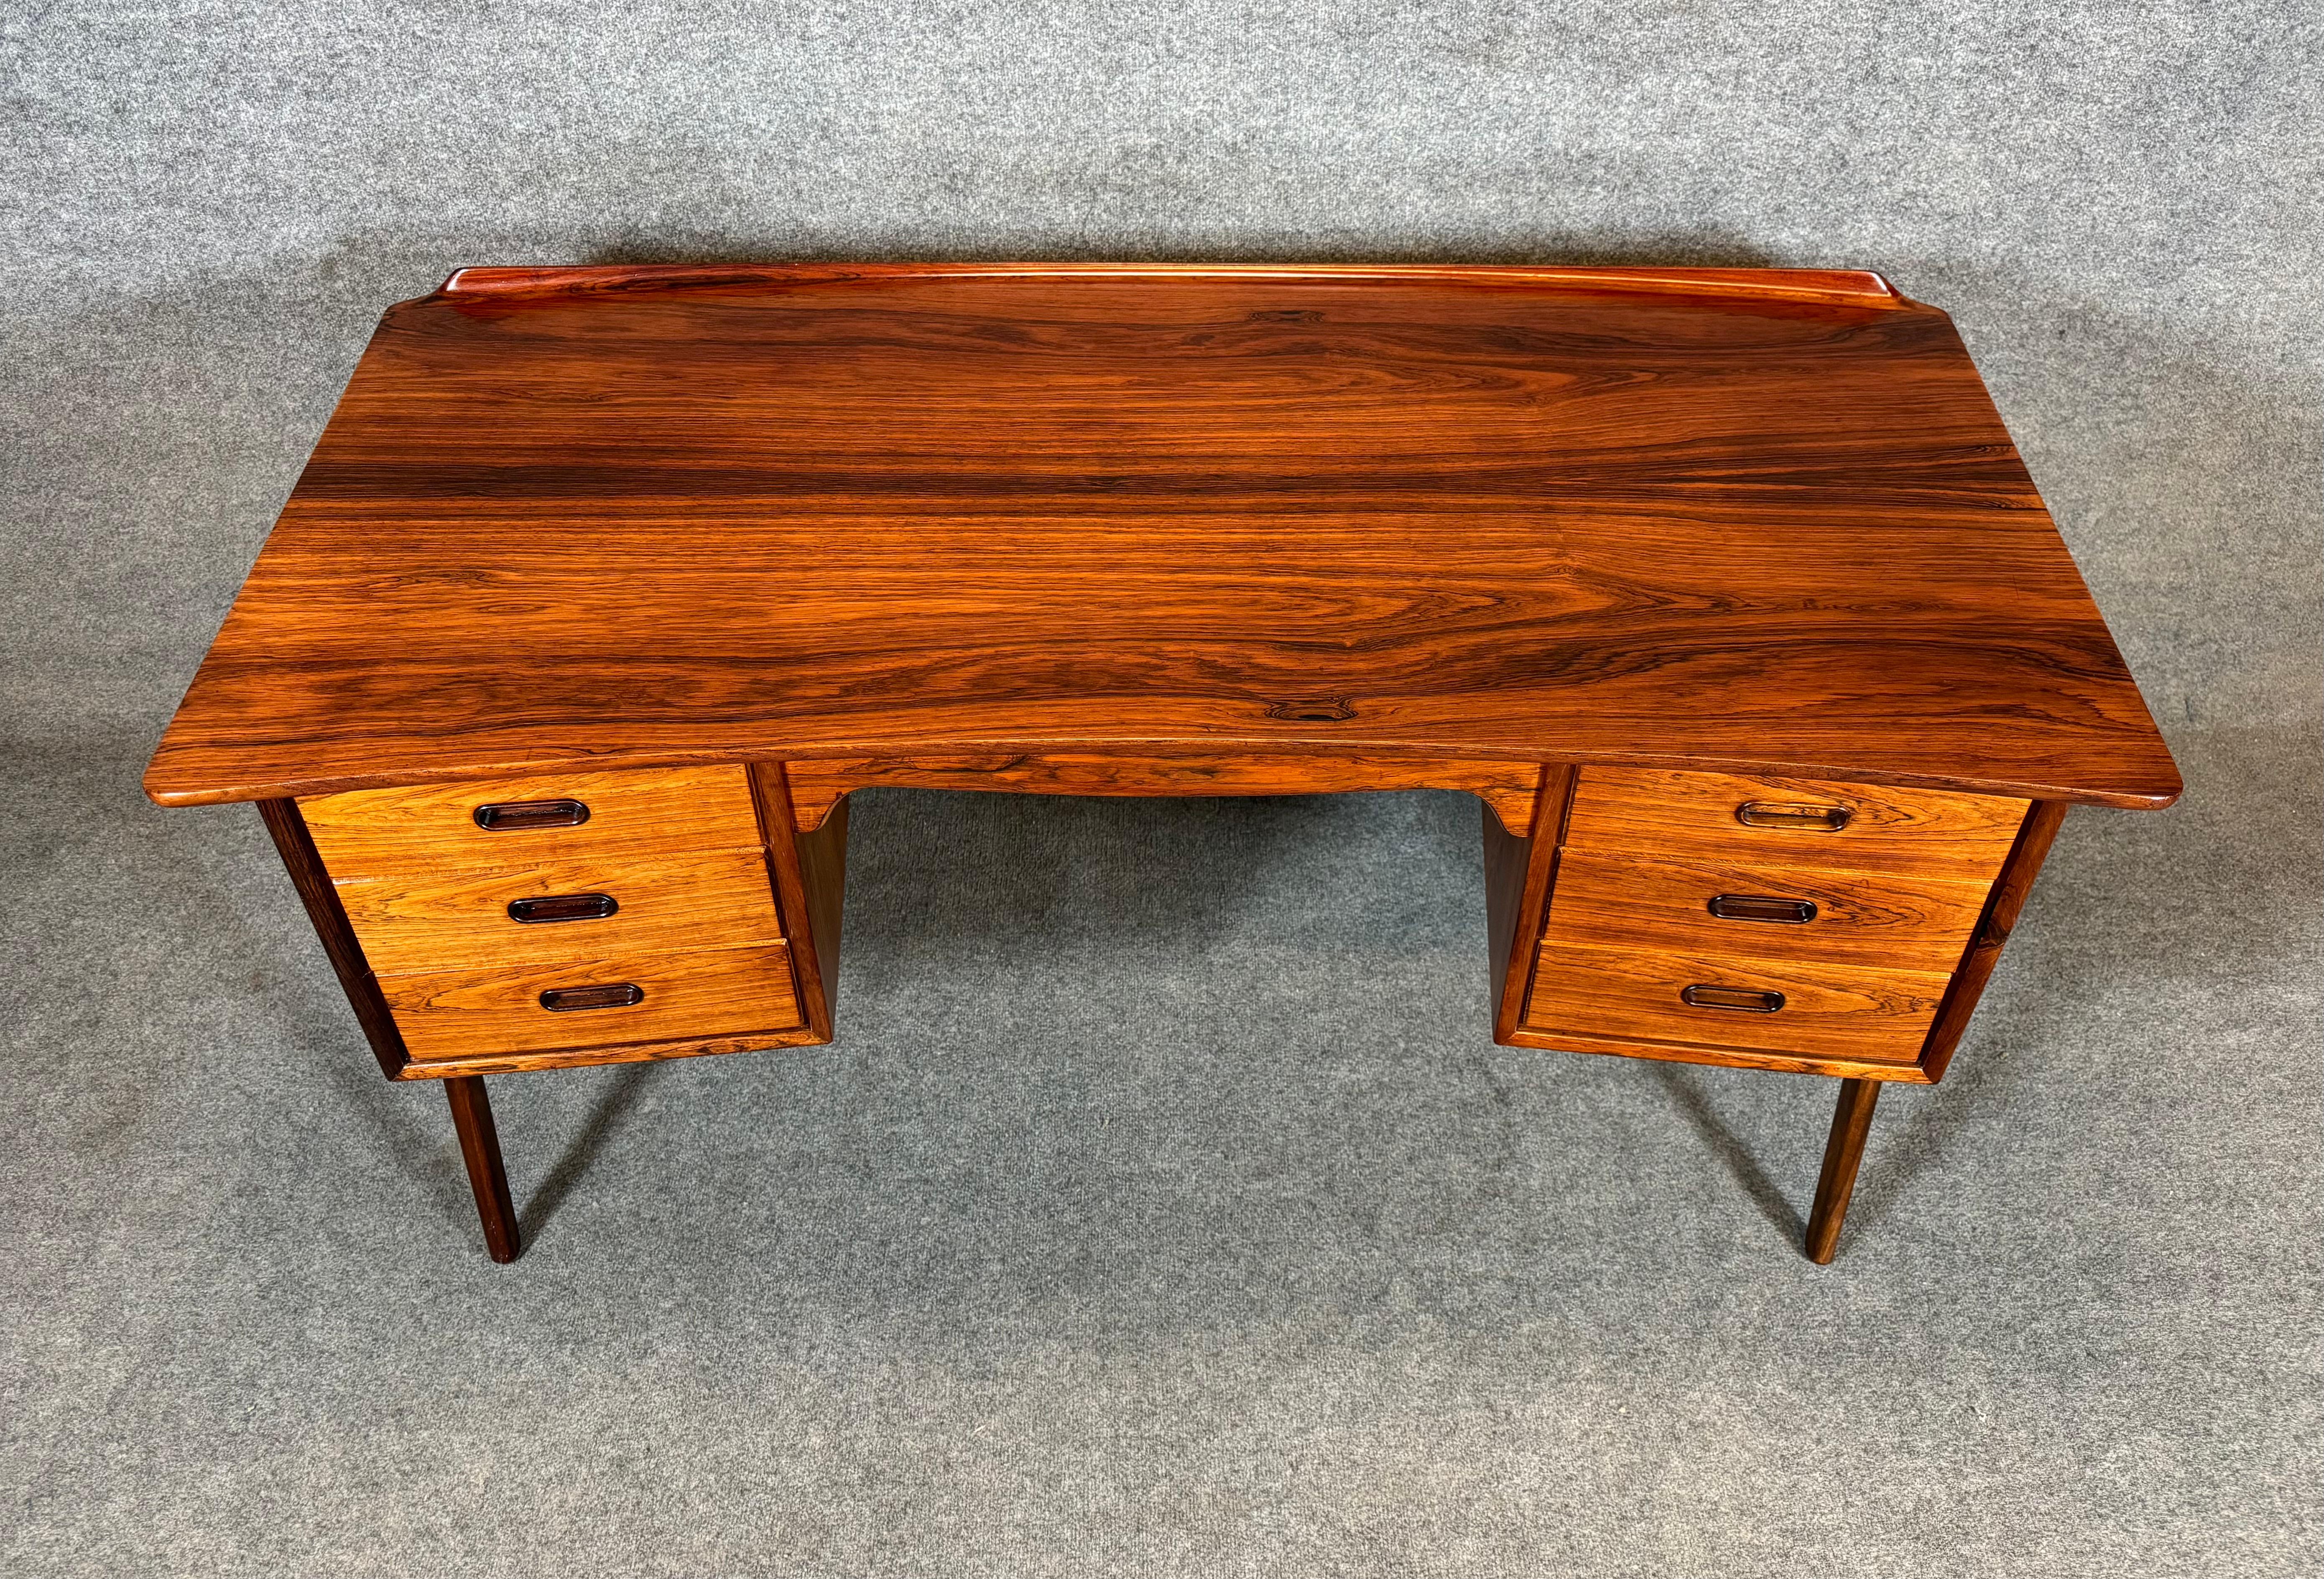 Here is a beautiful and sought after scandinavian modern executive desk in rosewood designed by Svend Madsen and manufactured by HP Hansen in Denmark in the 1960's. This special desk, recently imported from Europe to California before its